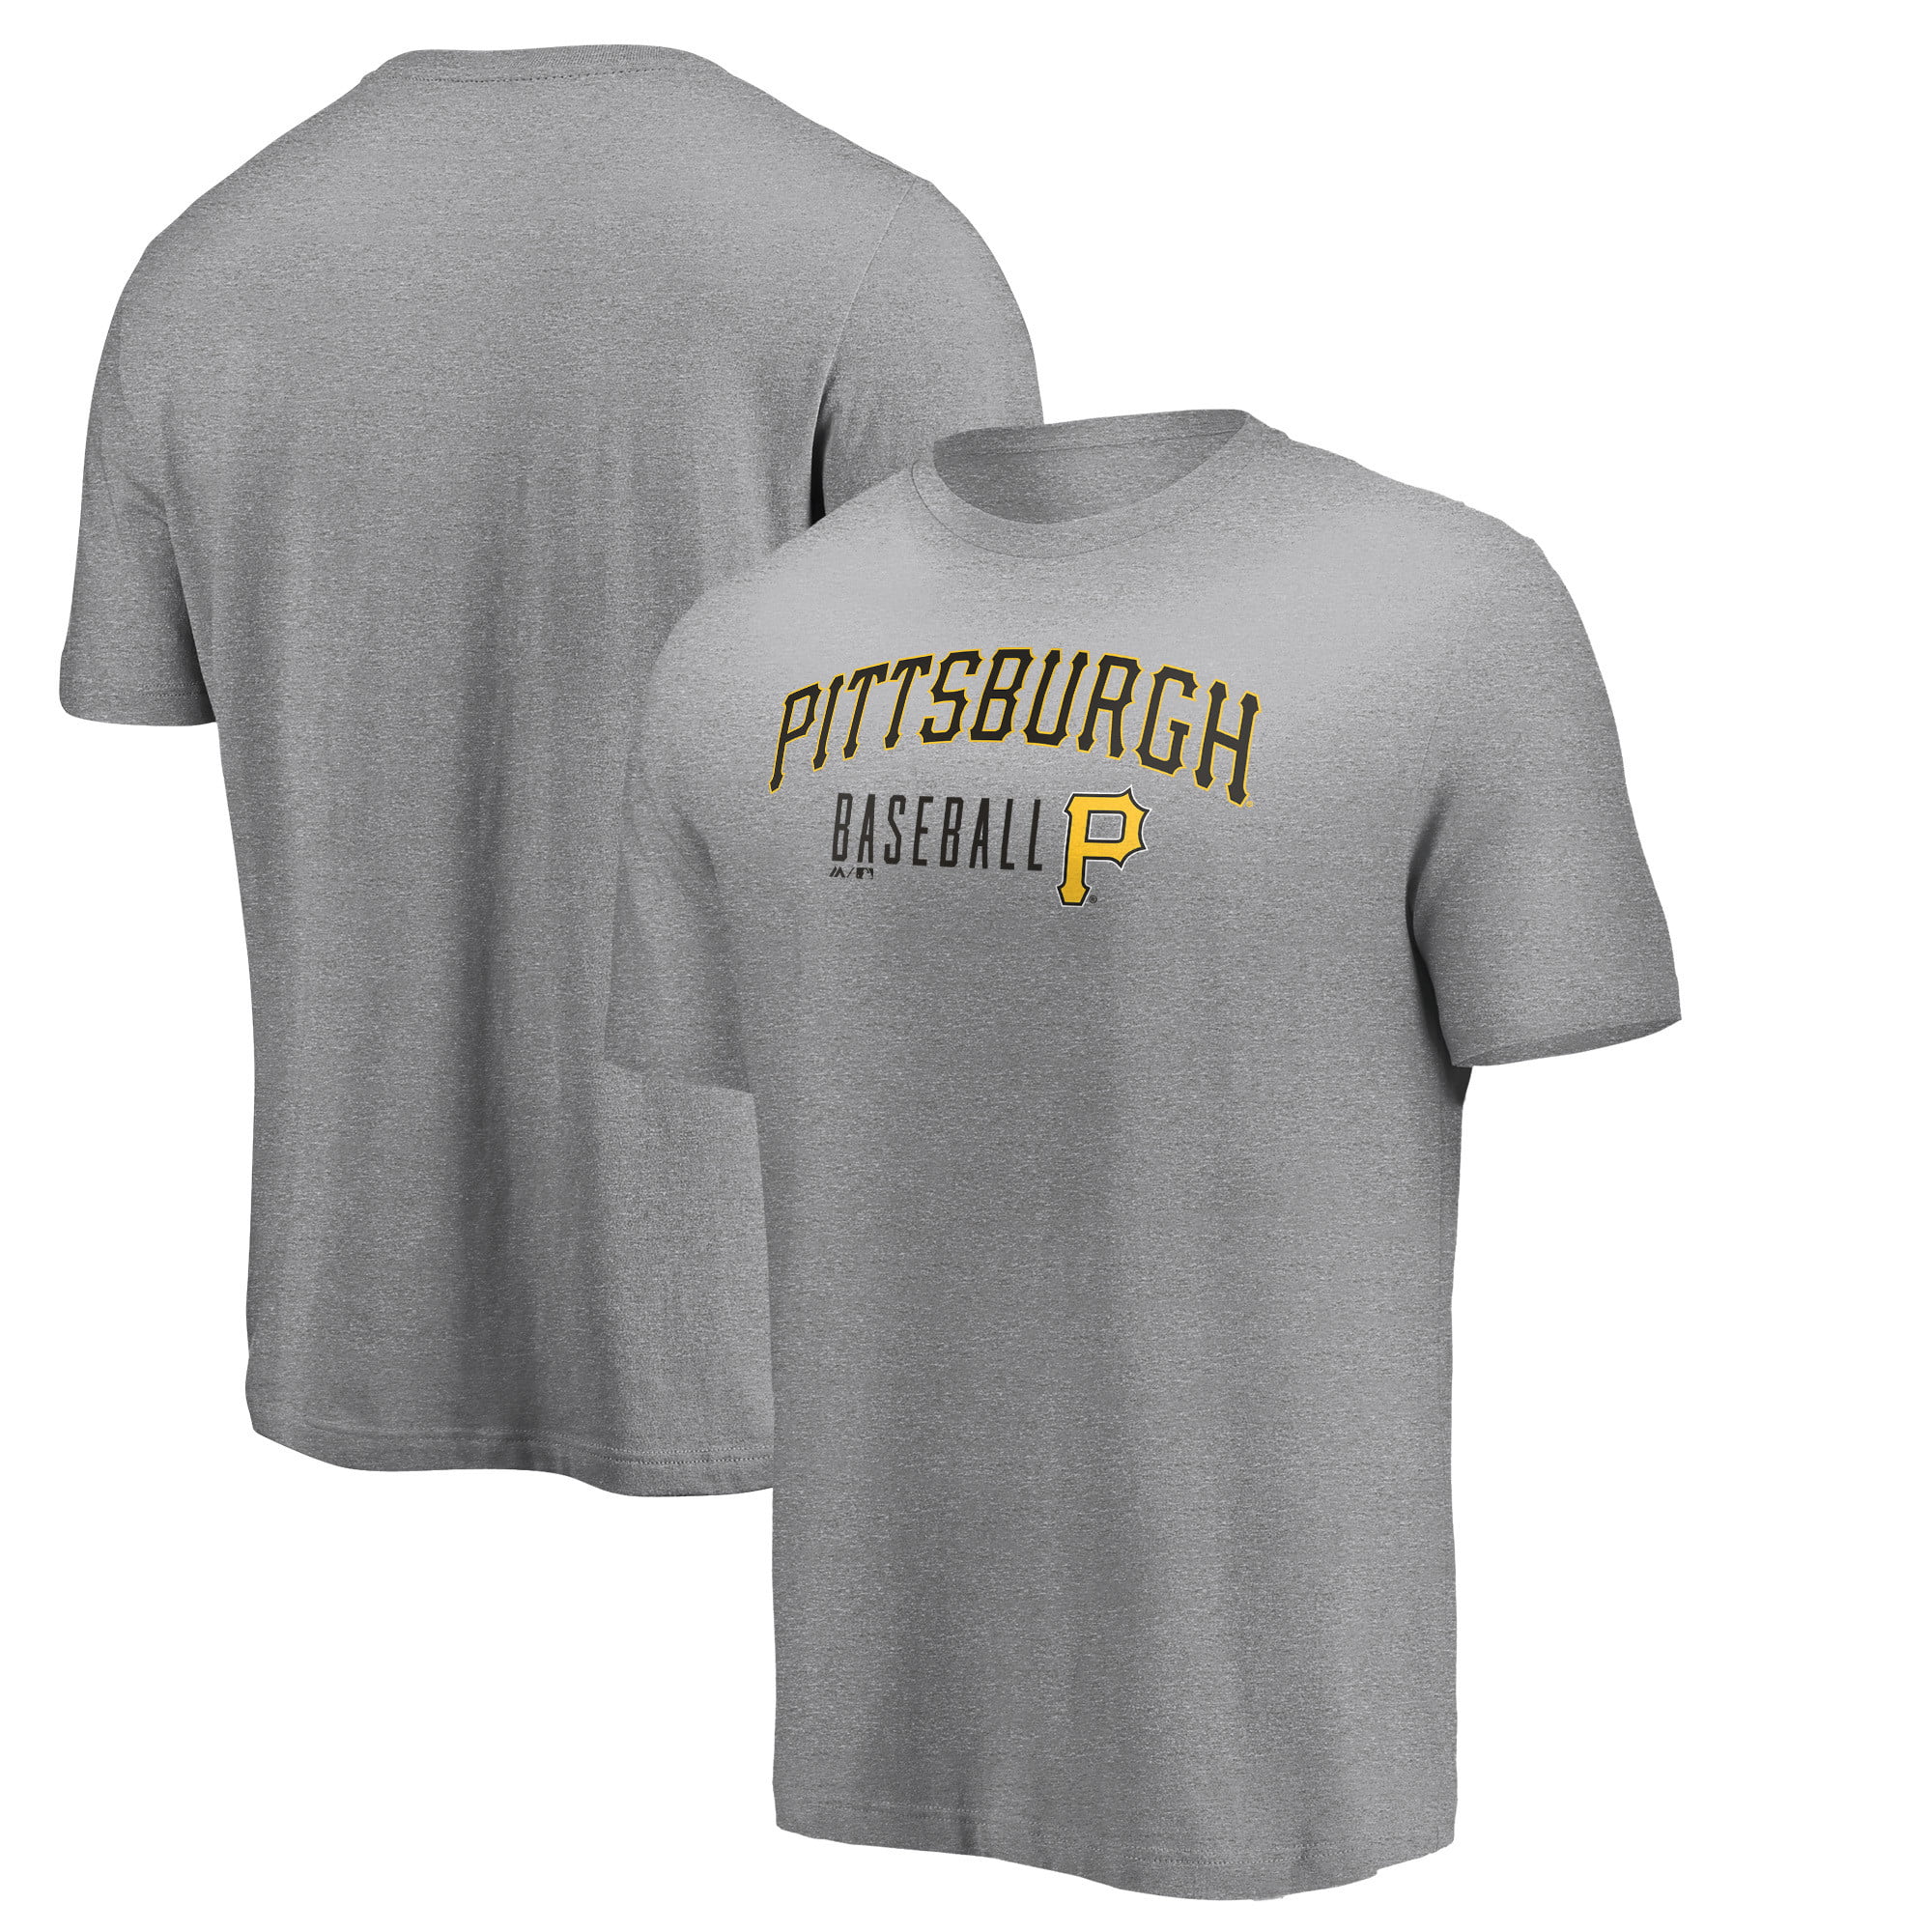 Men's Majestic Gray Pittsburgh Pirates Official Fandom T-Shirt